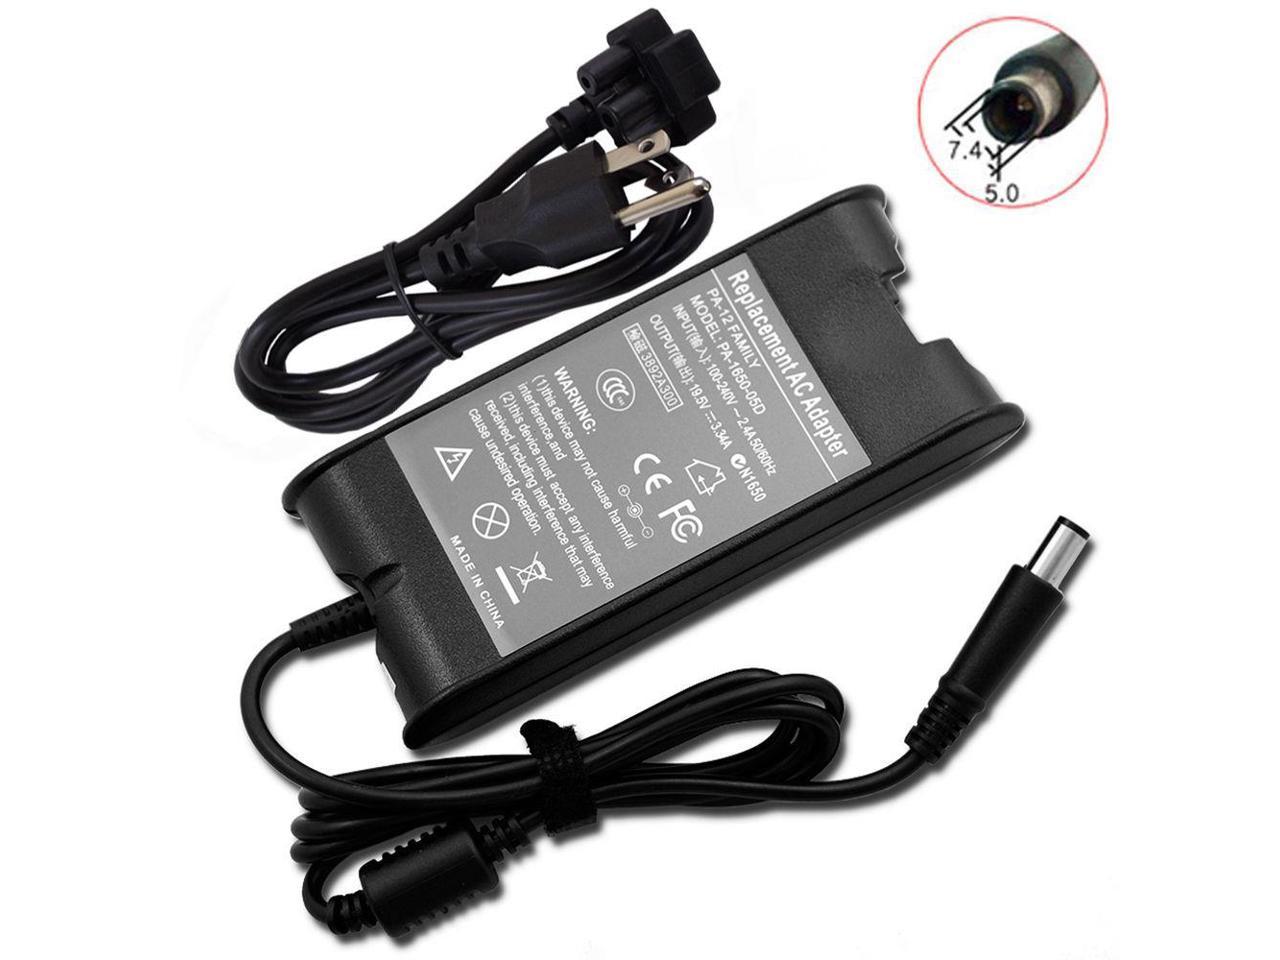 Laptop Ac Adapter Charger for Dell Inspiron N4020, N4030, N5010, N5030